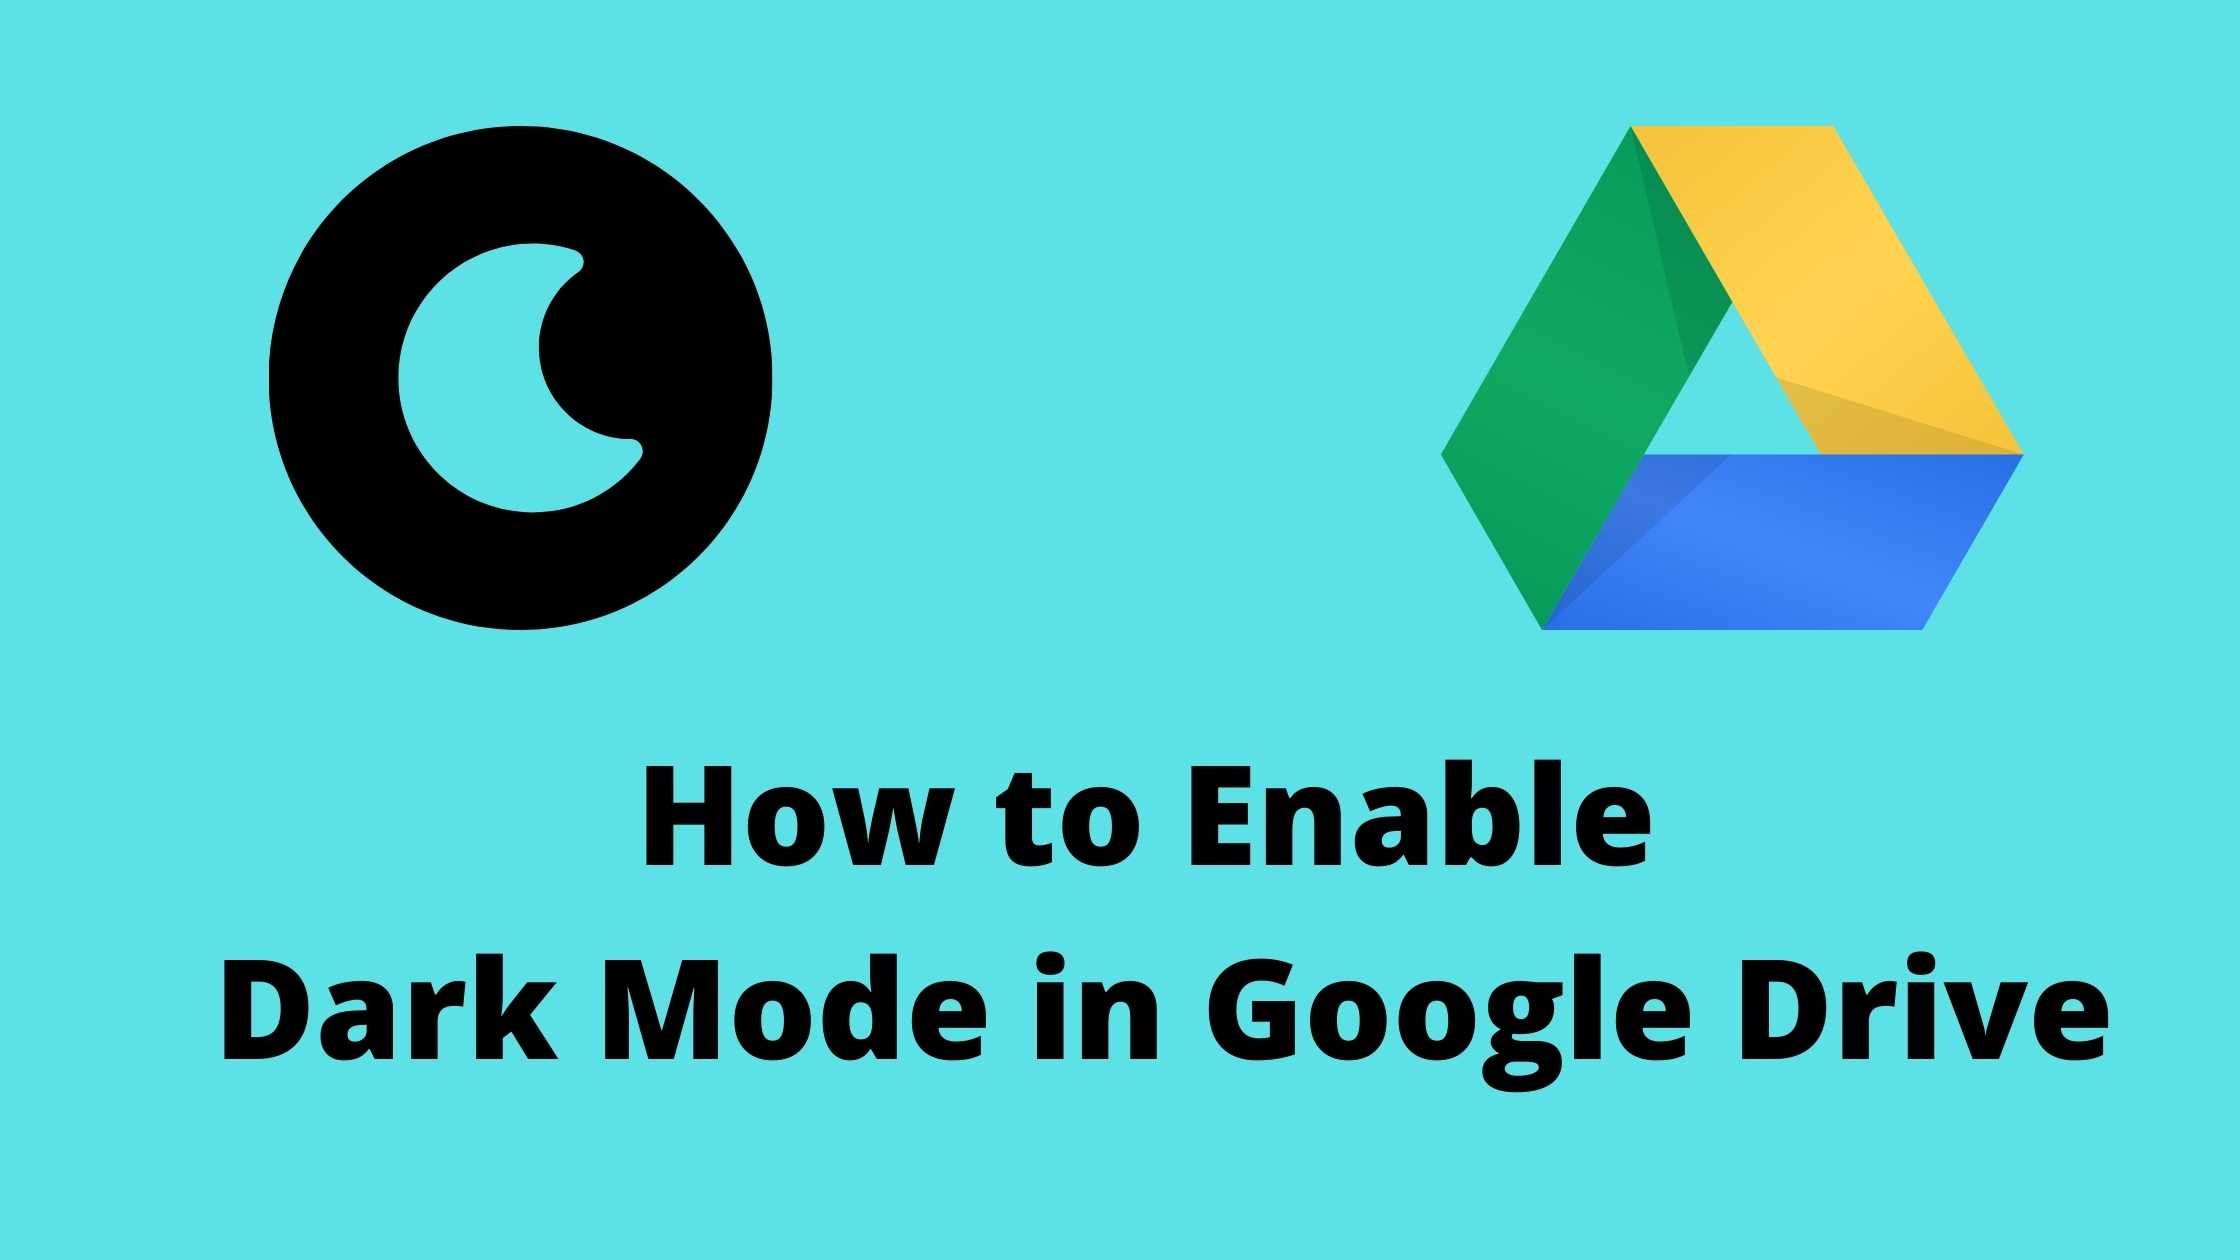 how to enable dark mode in Google drive